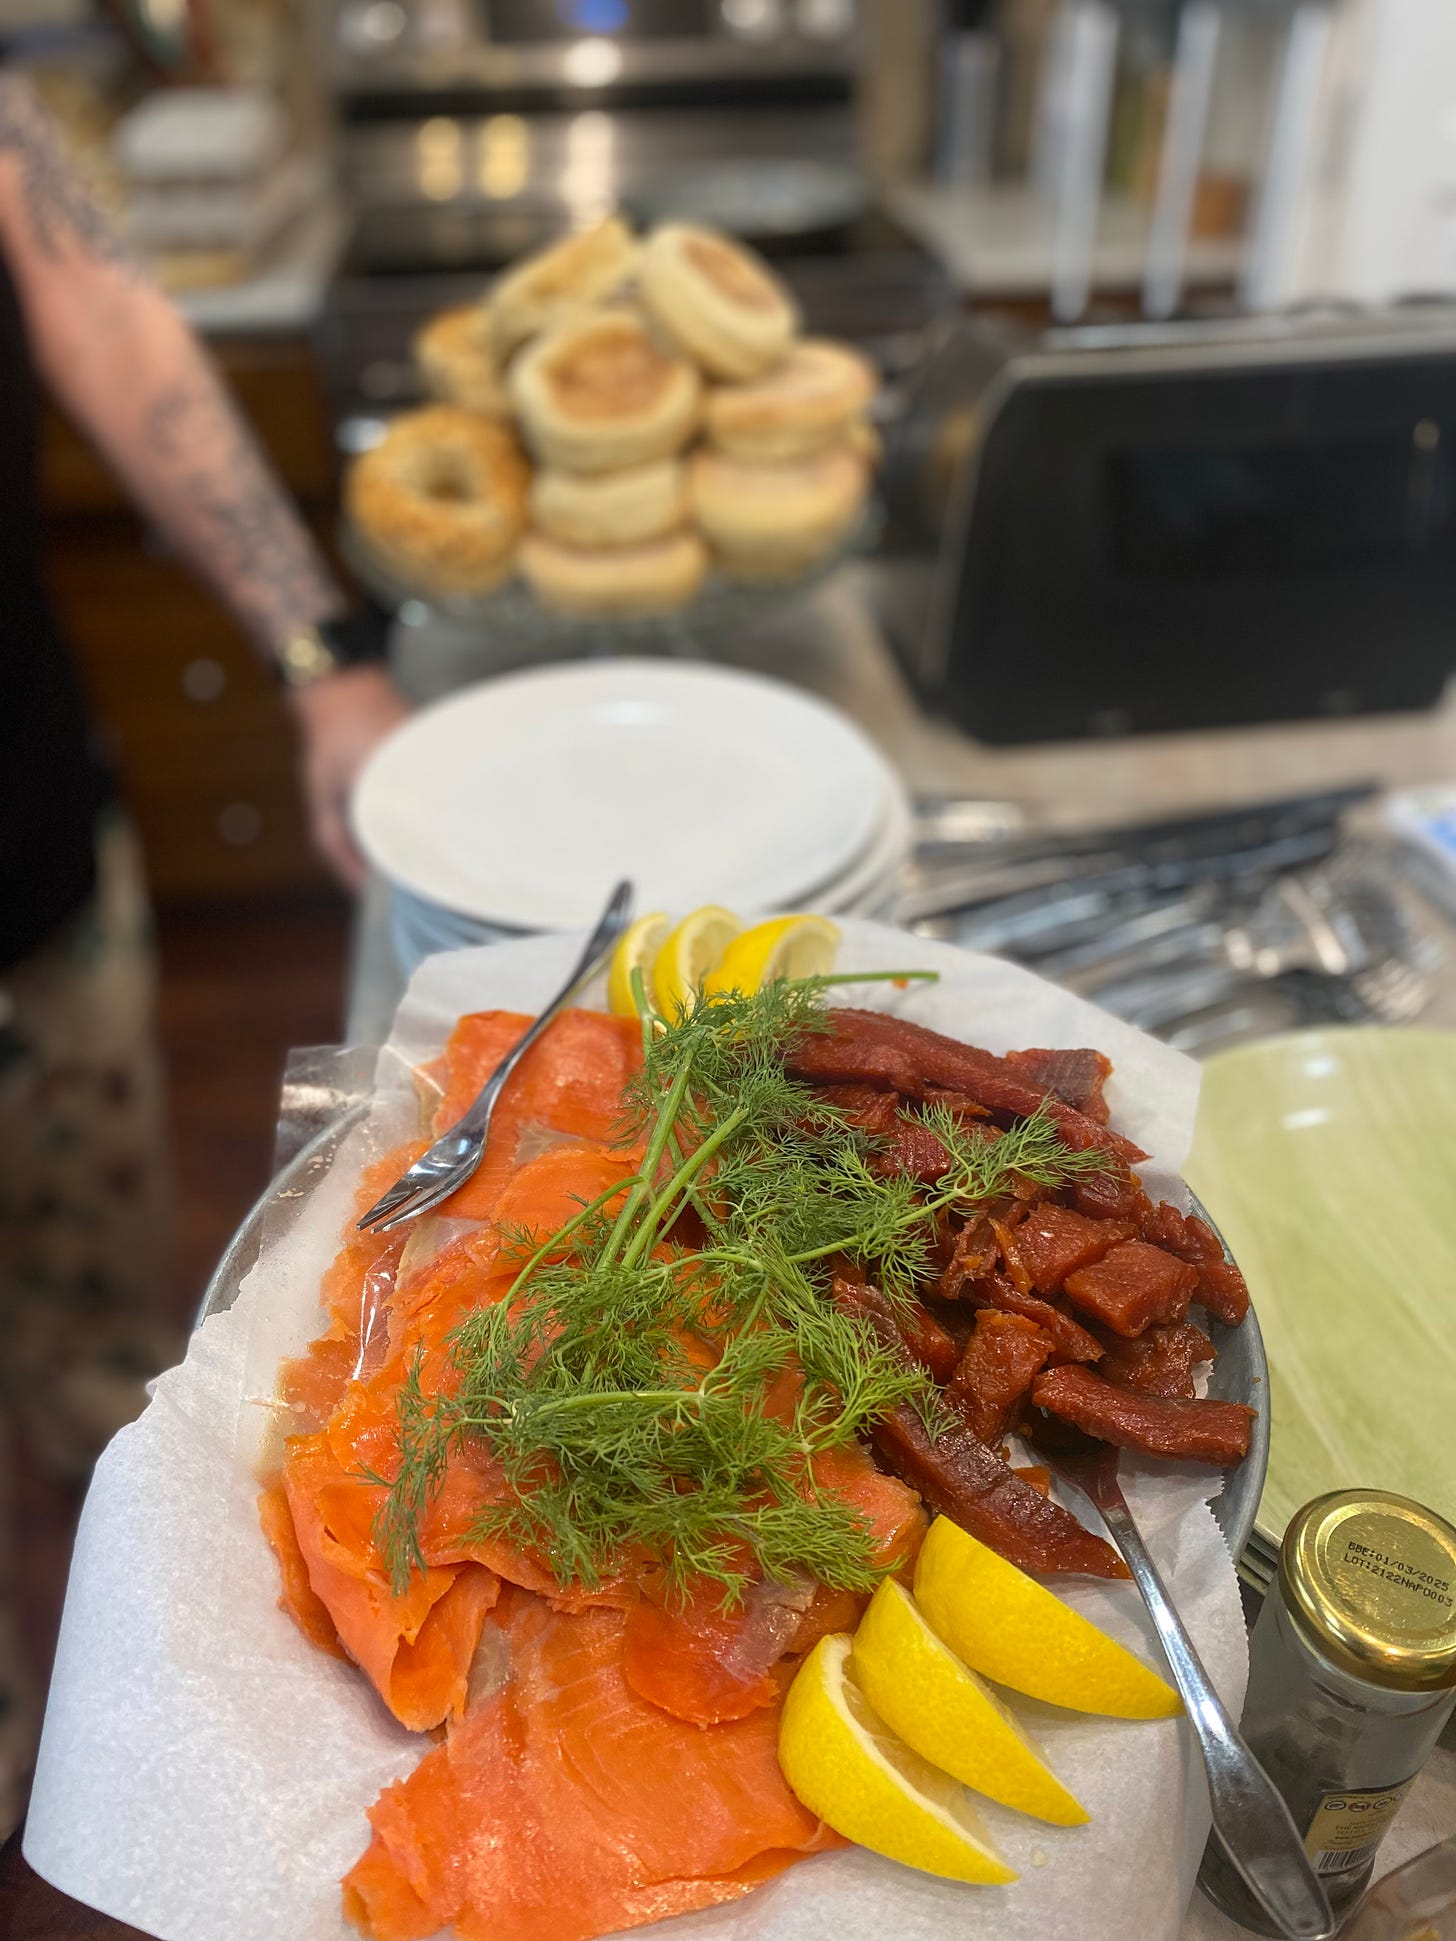 A platter of lox and maple-candied smoked salmon with sprigs of dill and wedges of lemon. In the background are a stack of plates and a pile of bagels and English muffins on a cake stand.